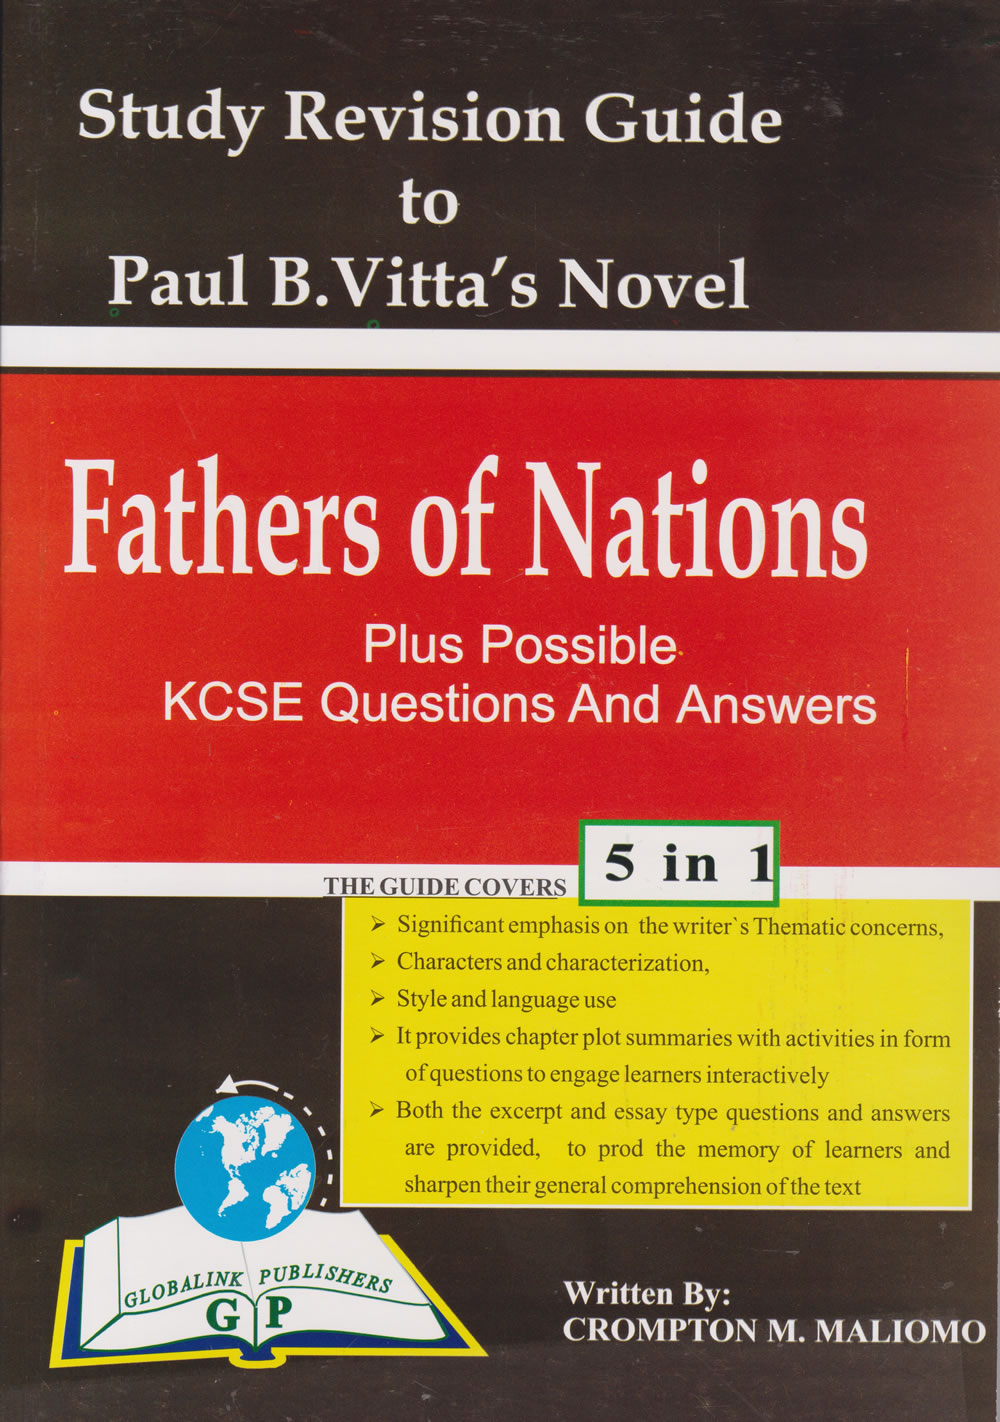 fathers of nations essay questions and answers pdf download